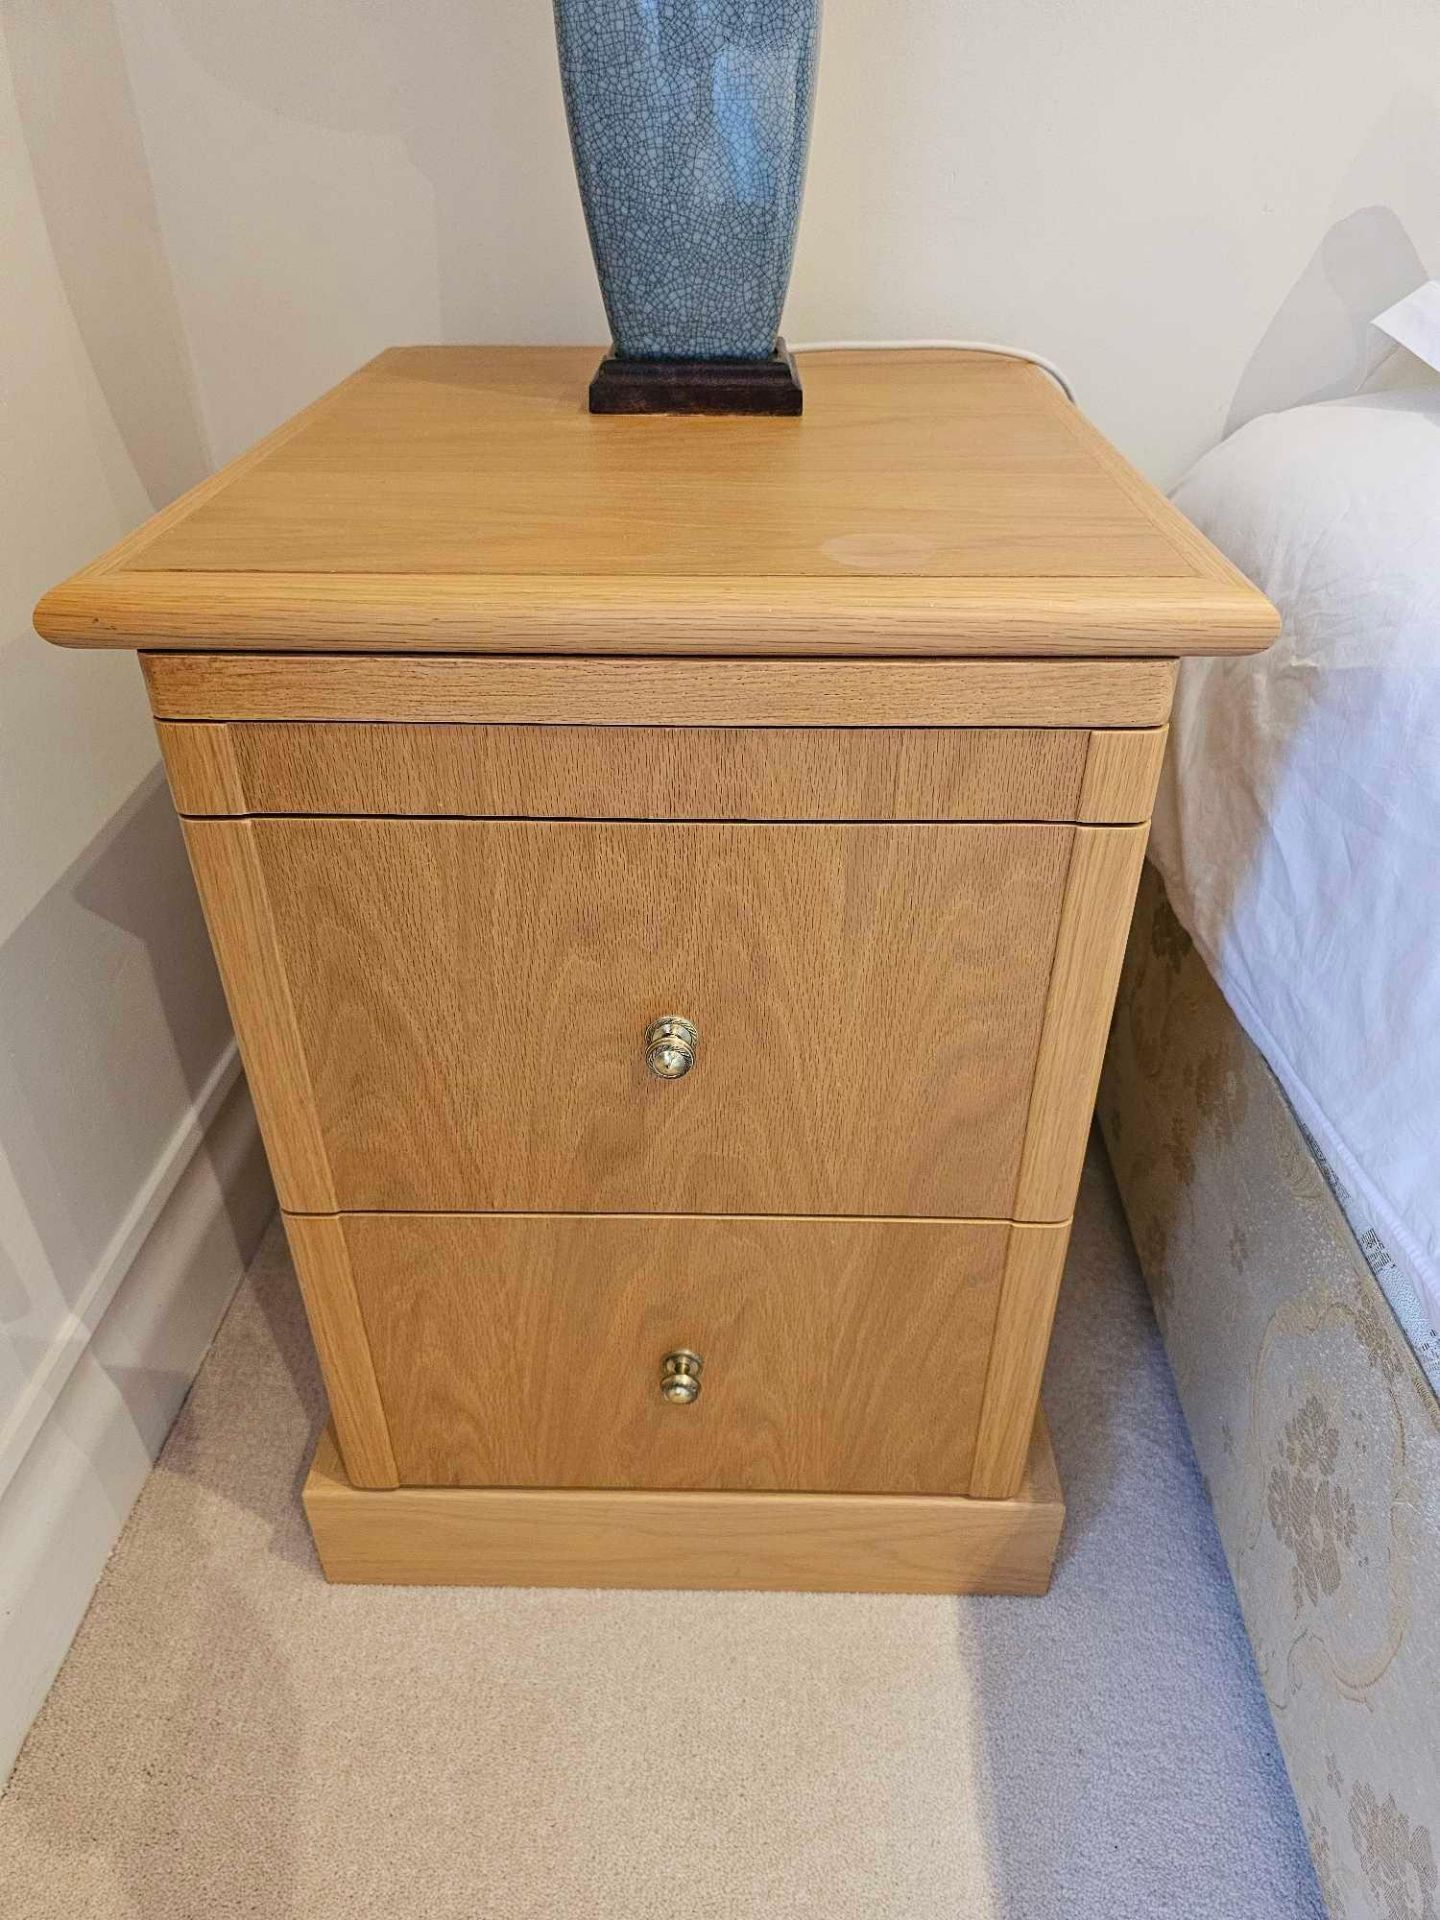 A Pair Of Oak Contemporary Two Drawer Nightstands 46 X 54 X 63cm - Image 3 of 4